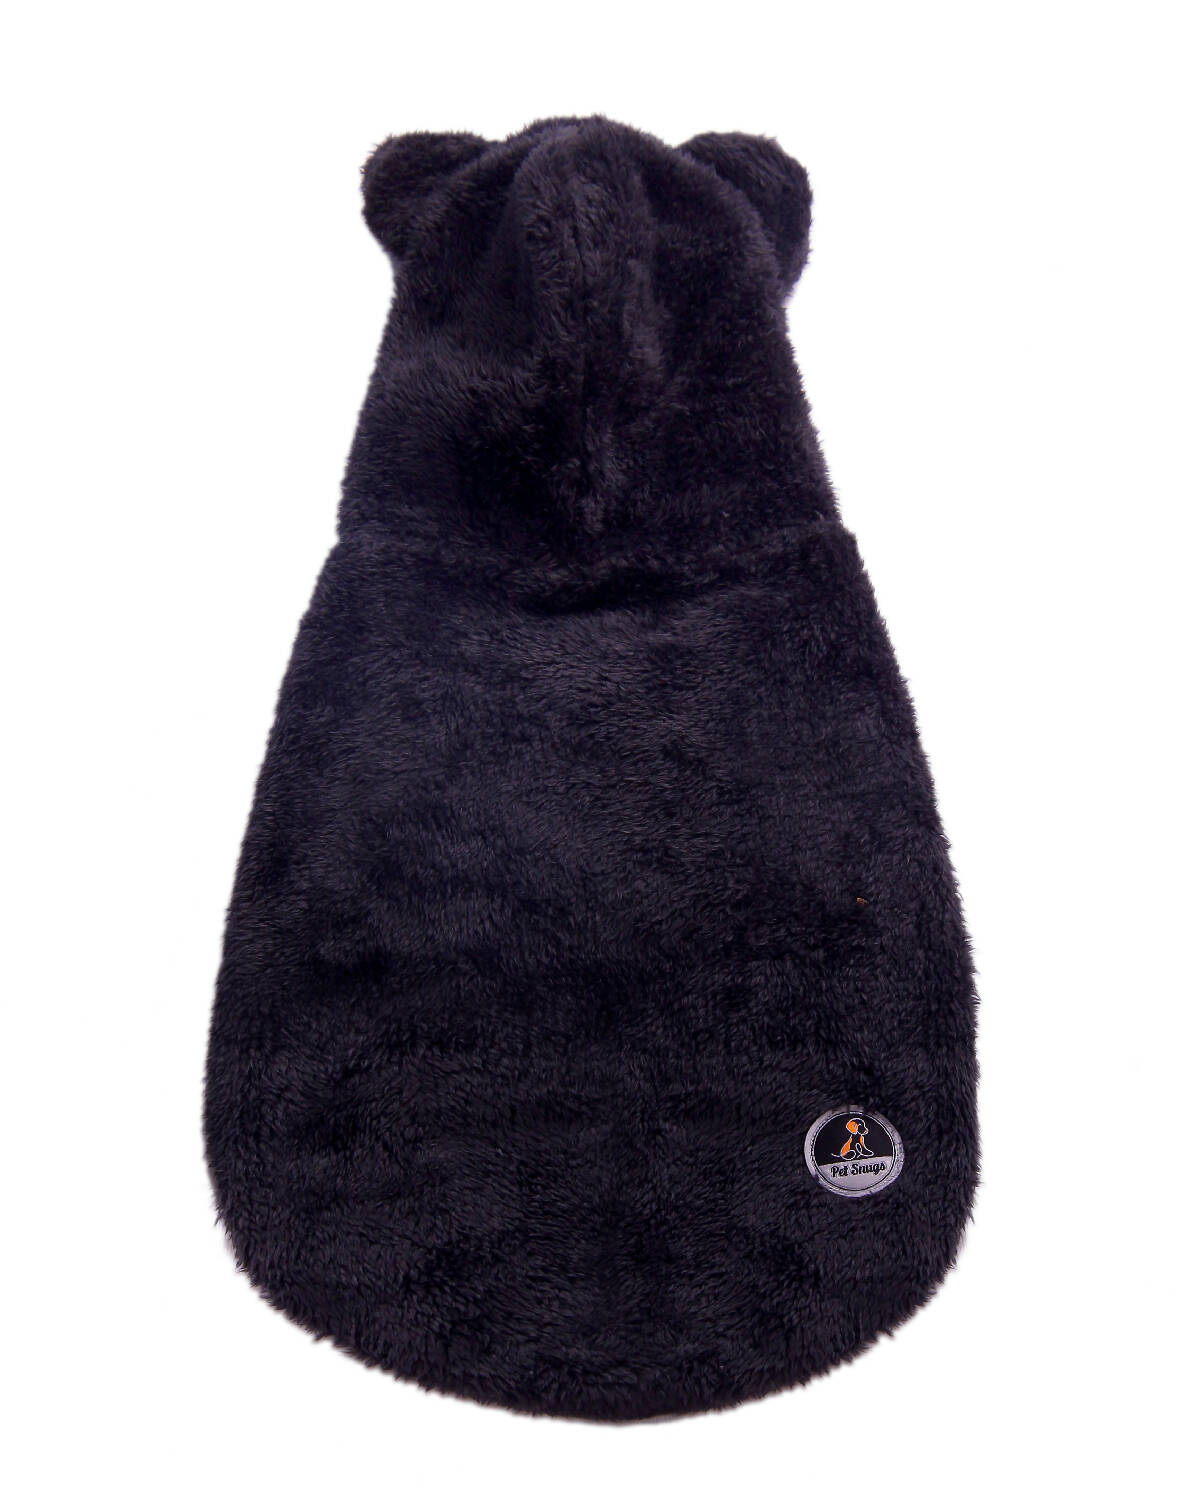 Petsnugs - Dark Grey Furry Sweater for dogs and cats